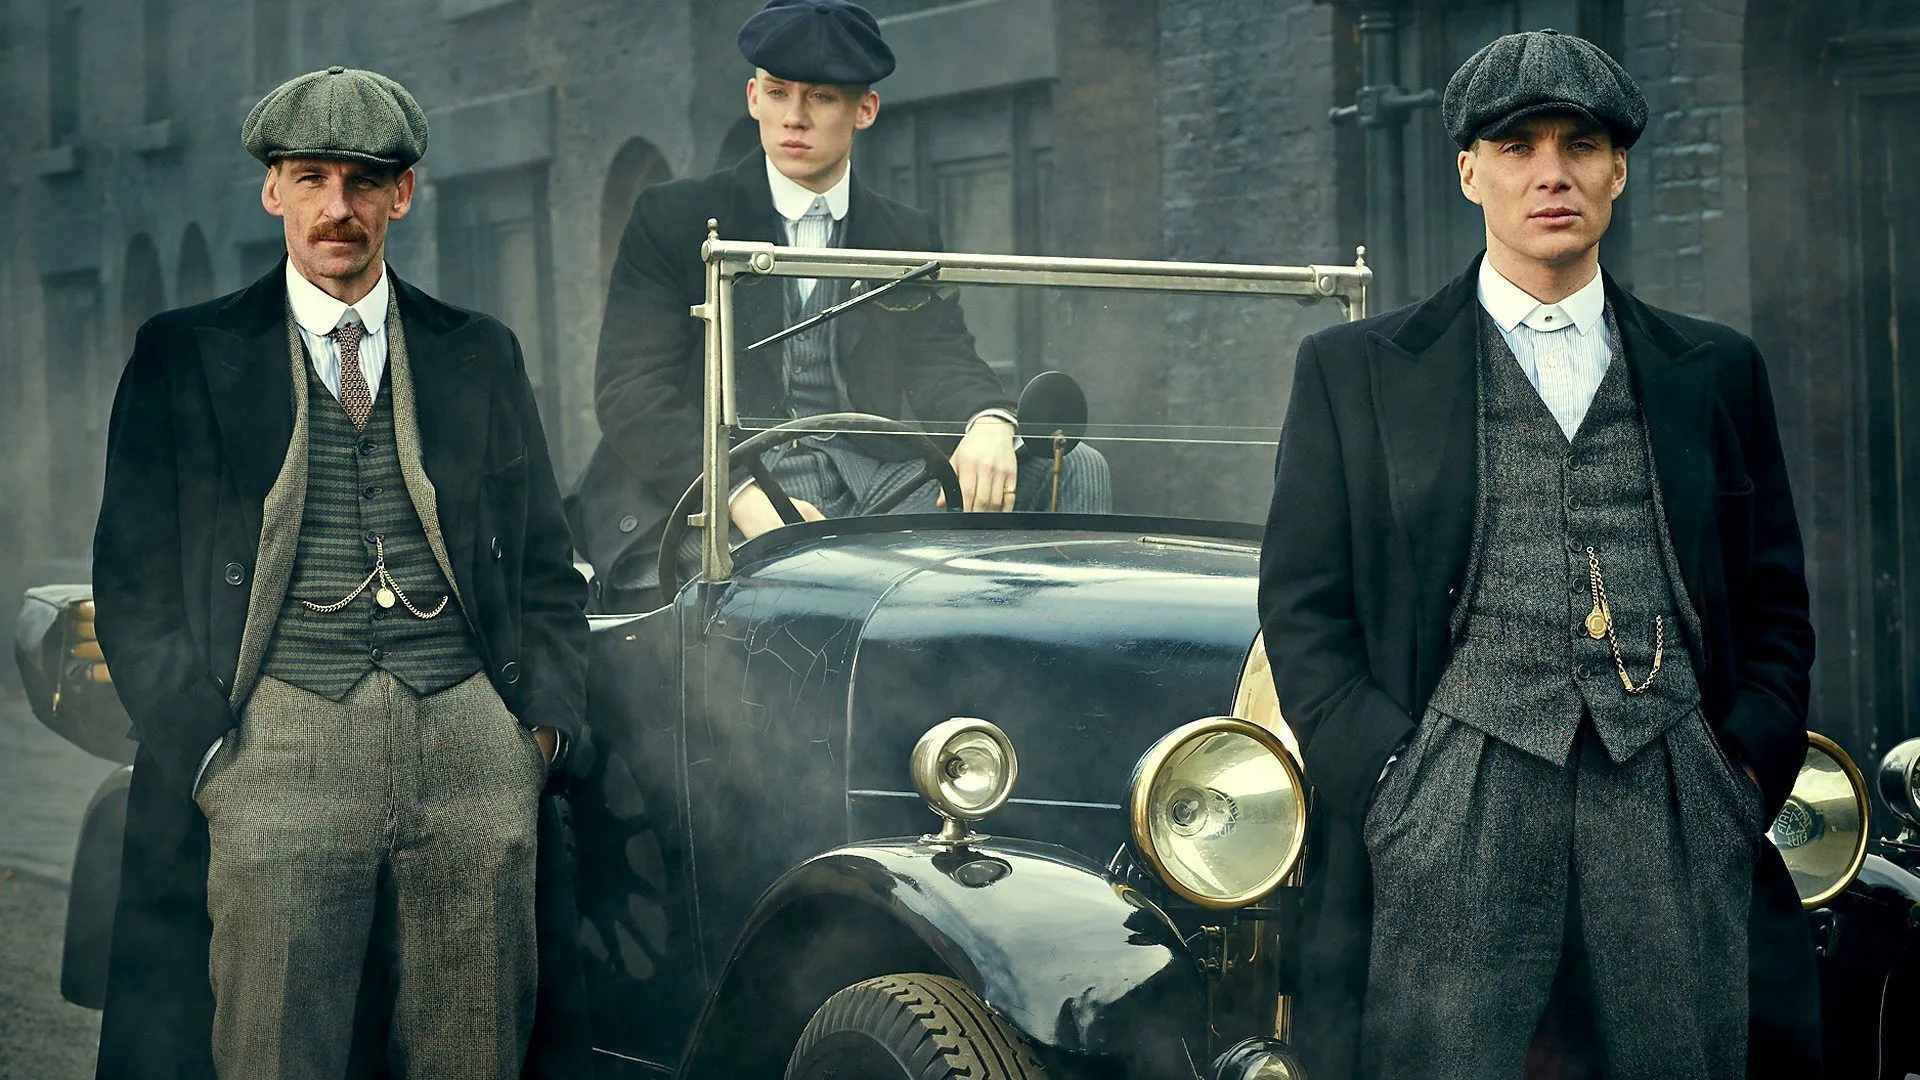 Peaky Blinders Update What's Next After Season 6 Movie Plans and Future Spin-offs Revealed